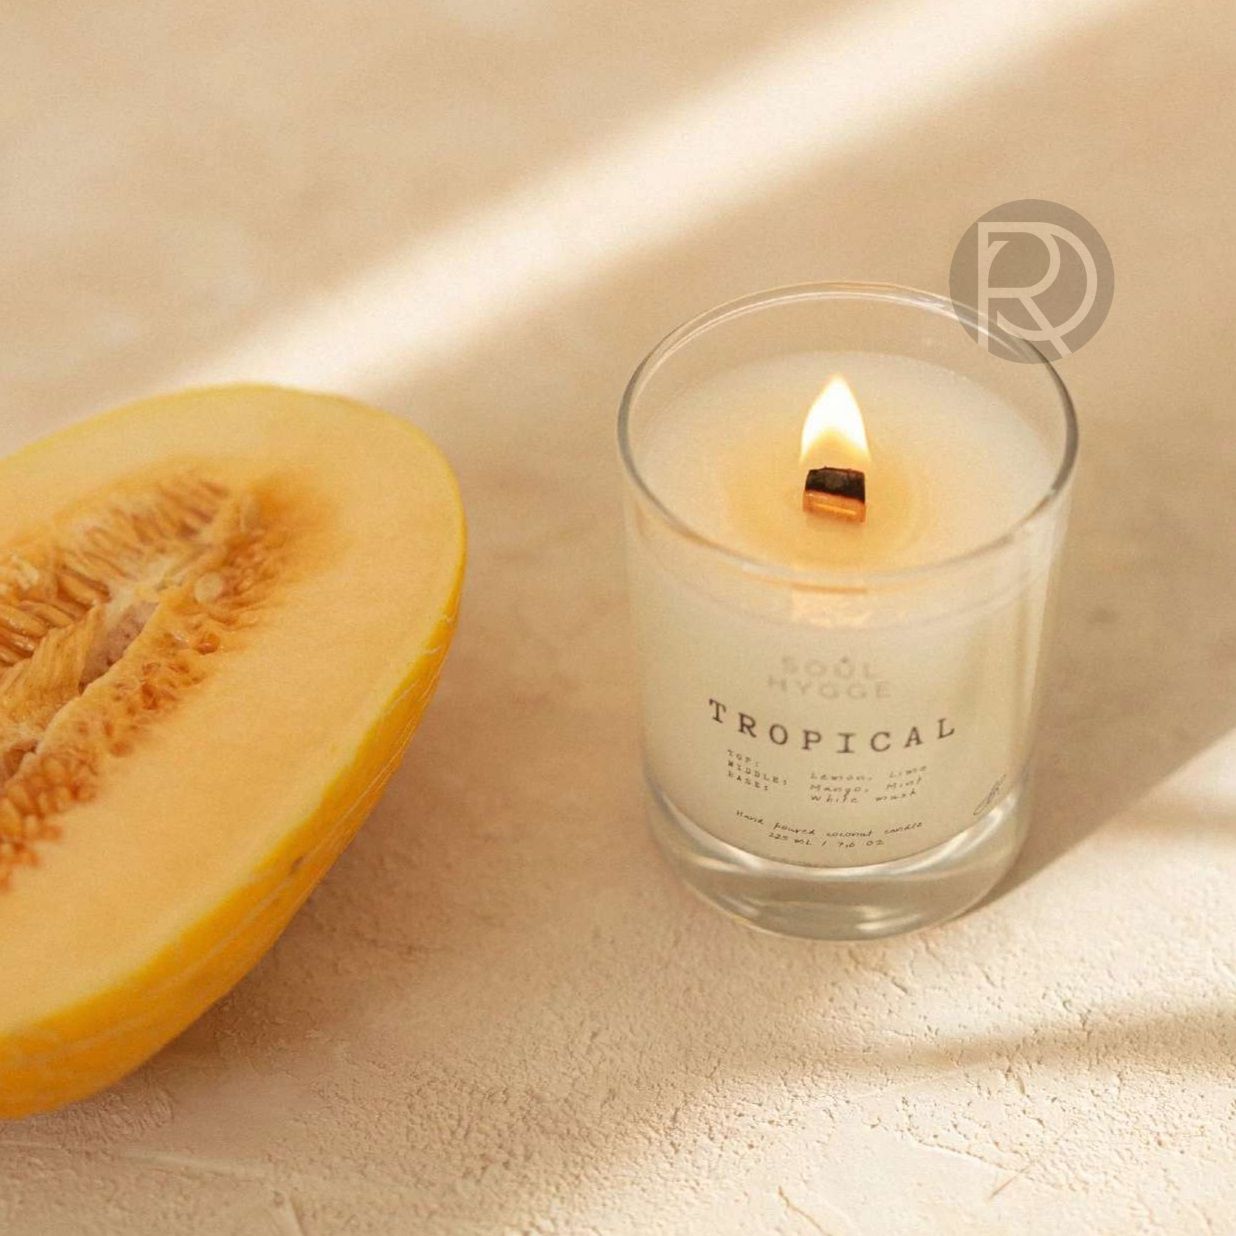 TROPICAL scented candle by Romatti